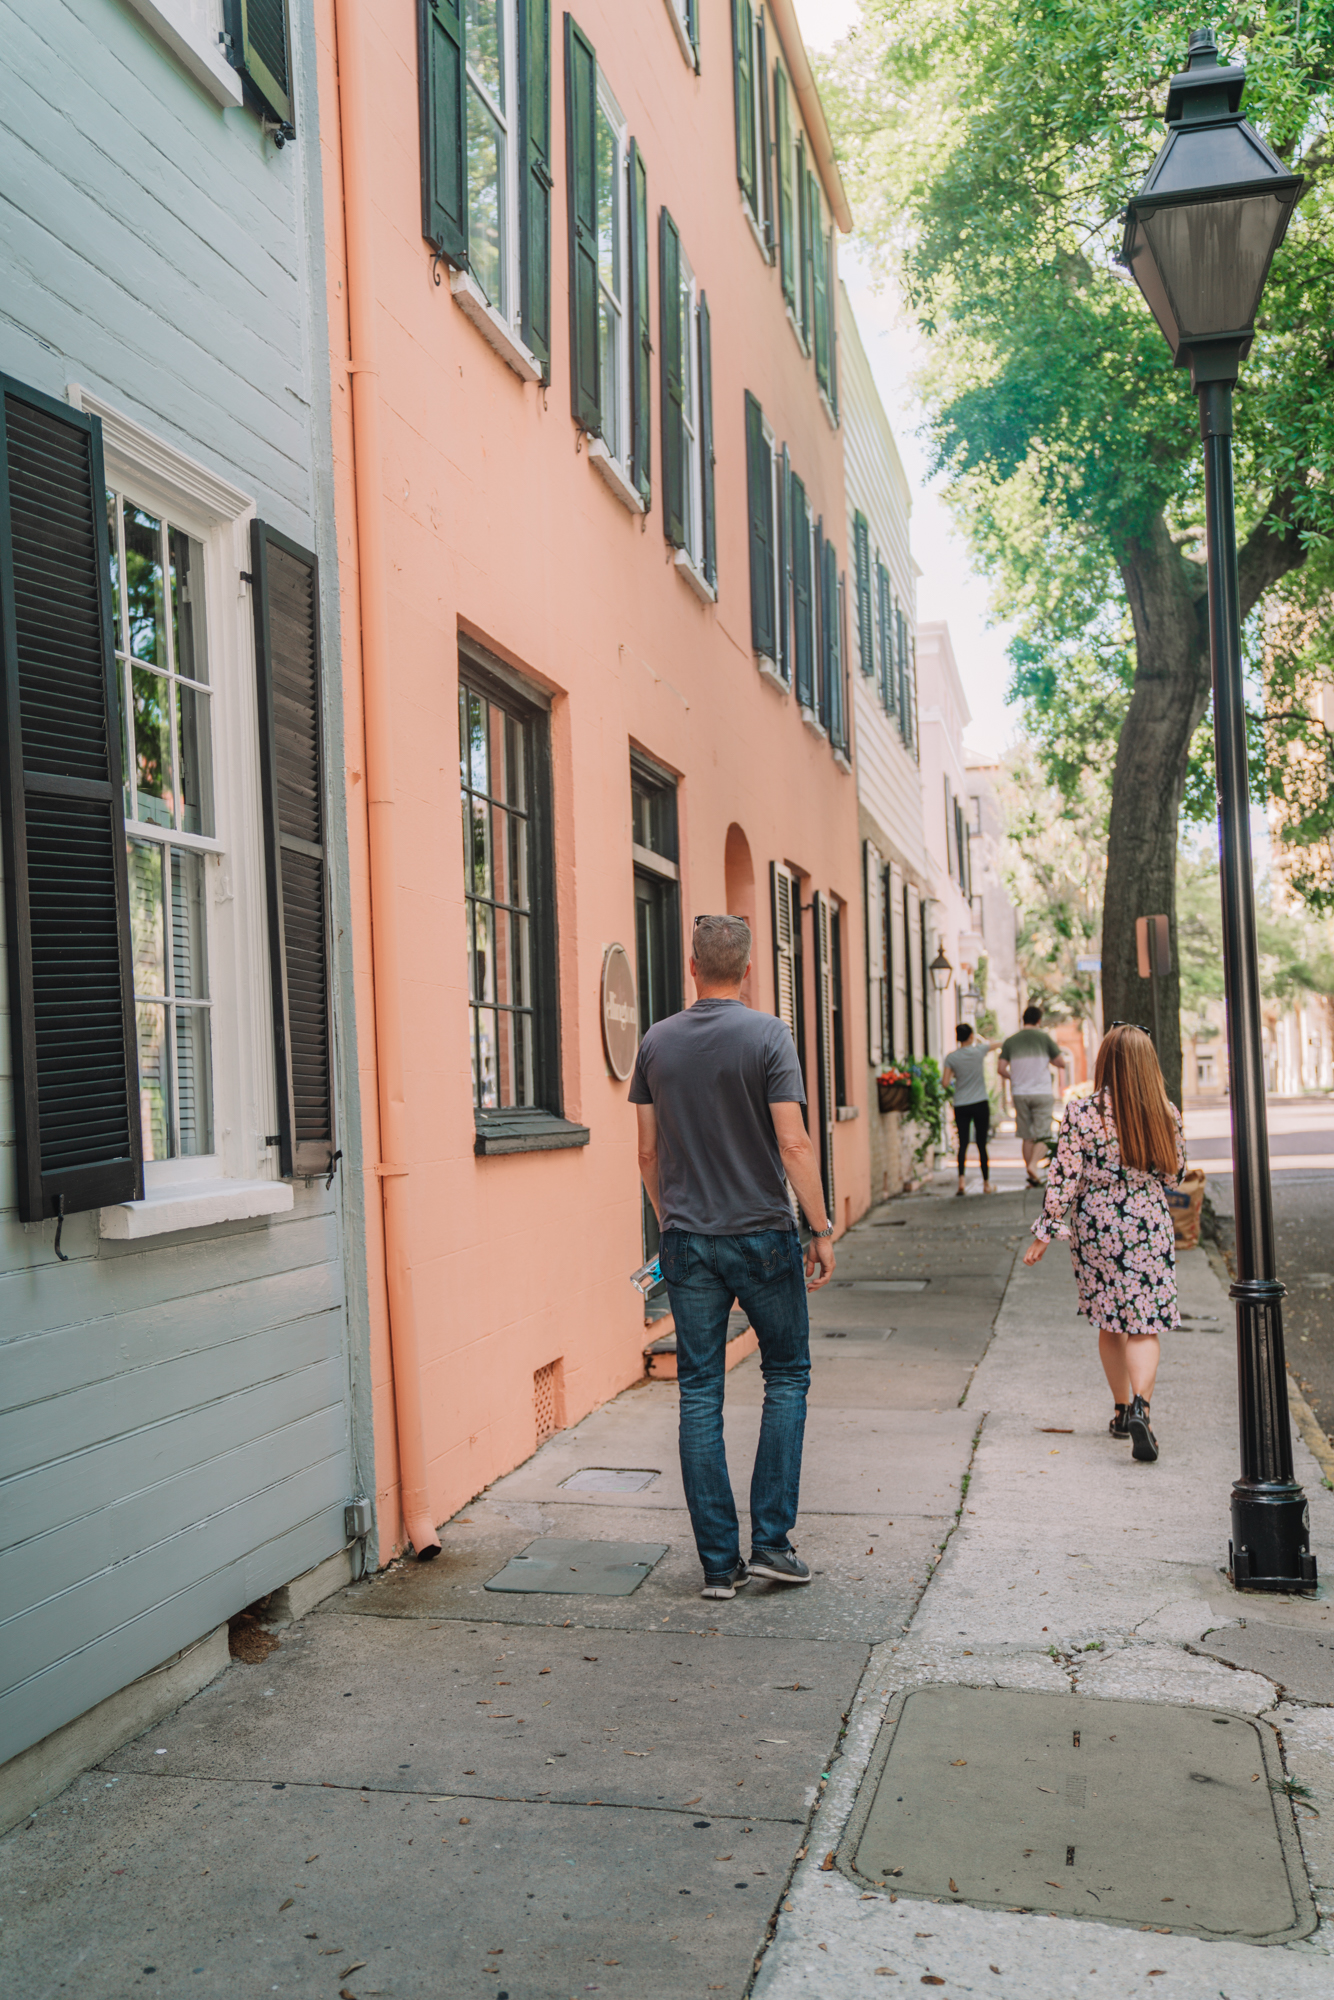 charleston sc visitors guide - a man and a women walk in front of the brightly colored souther houses in Charleston